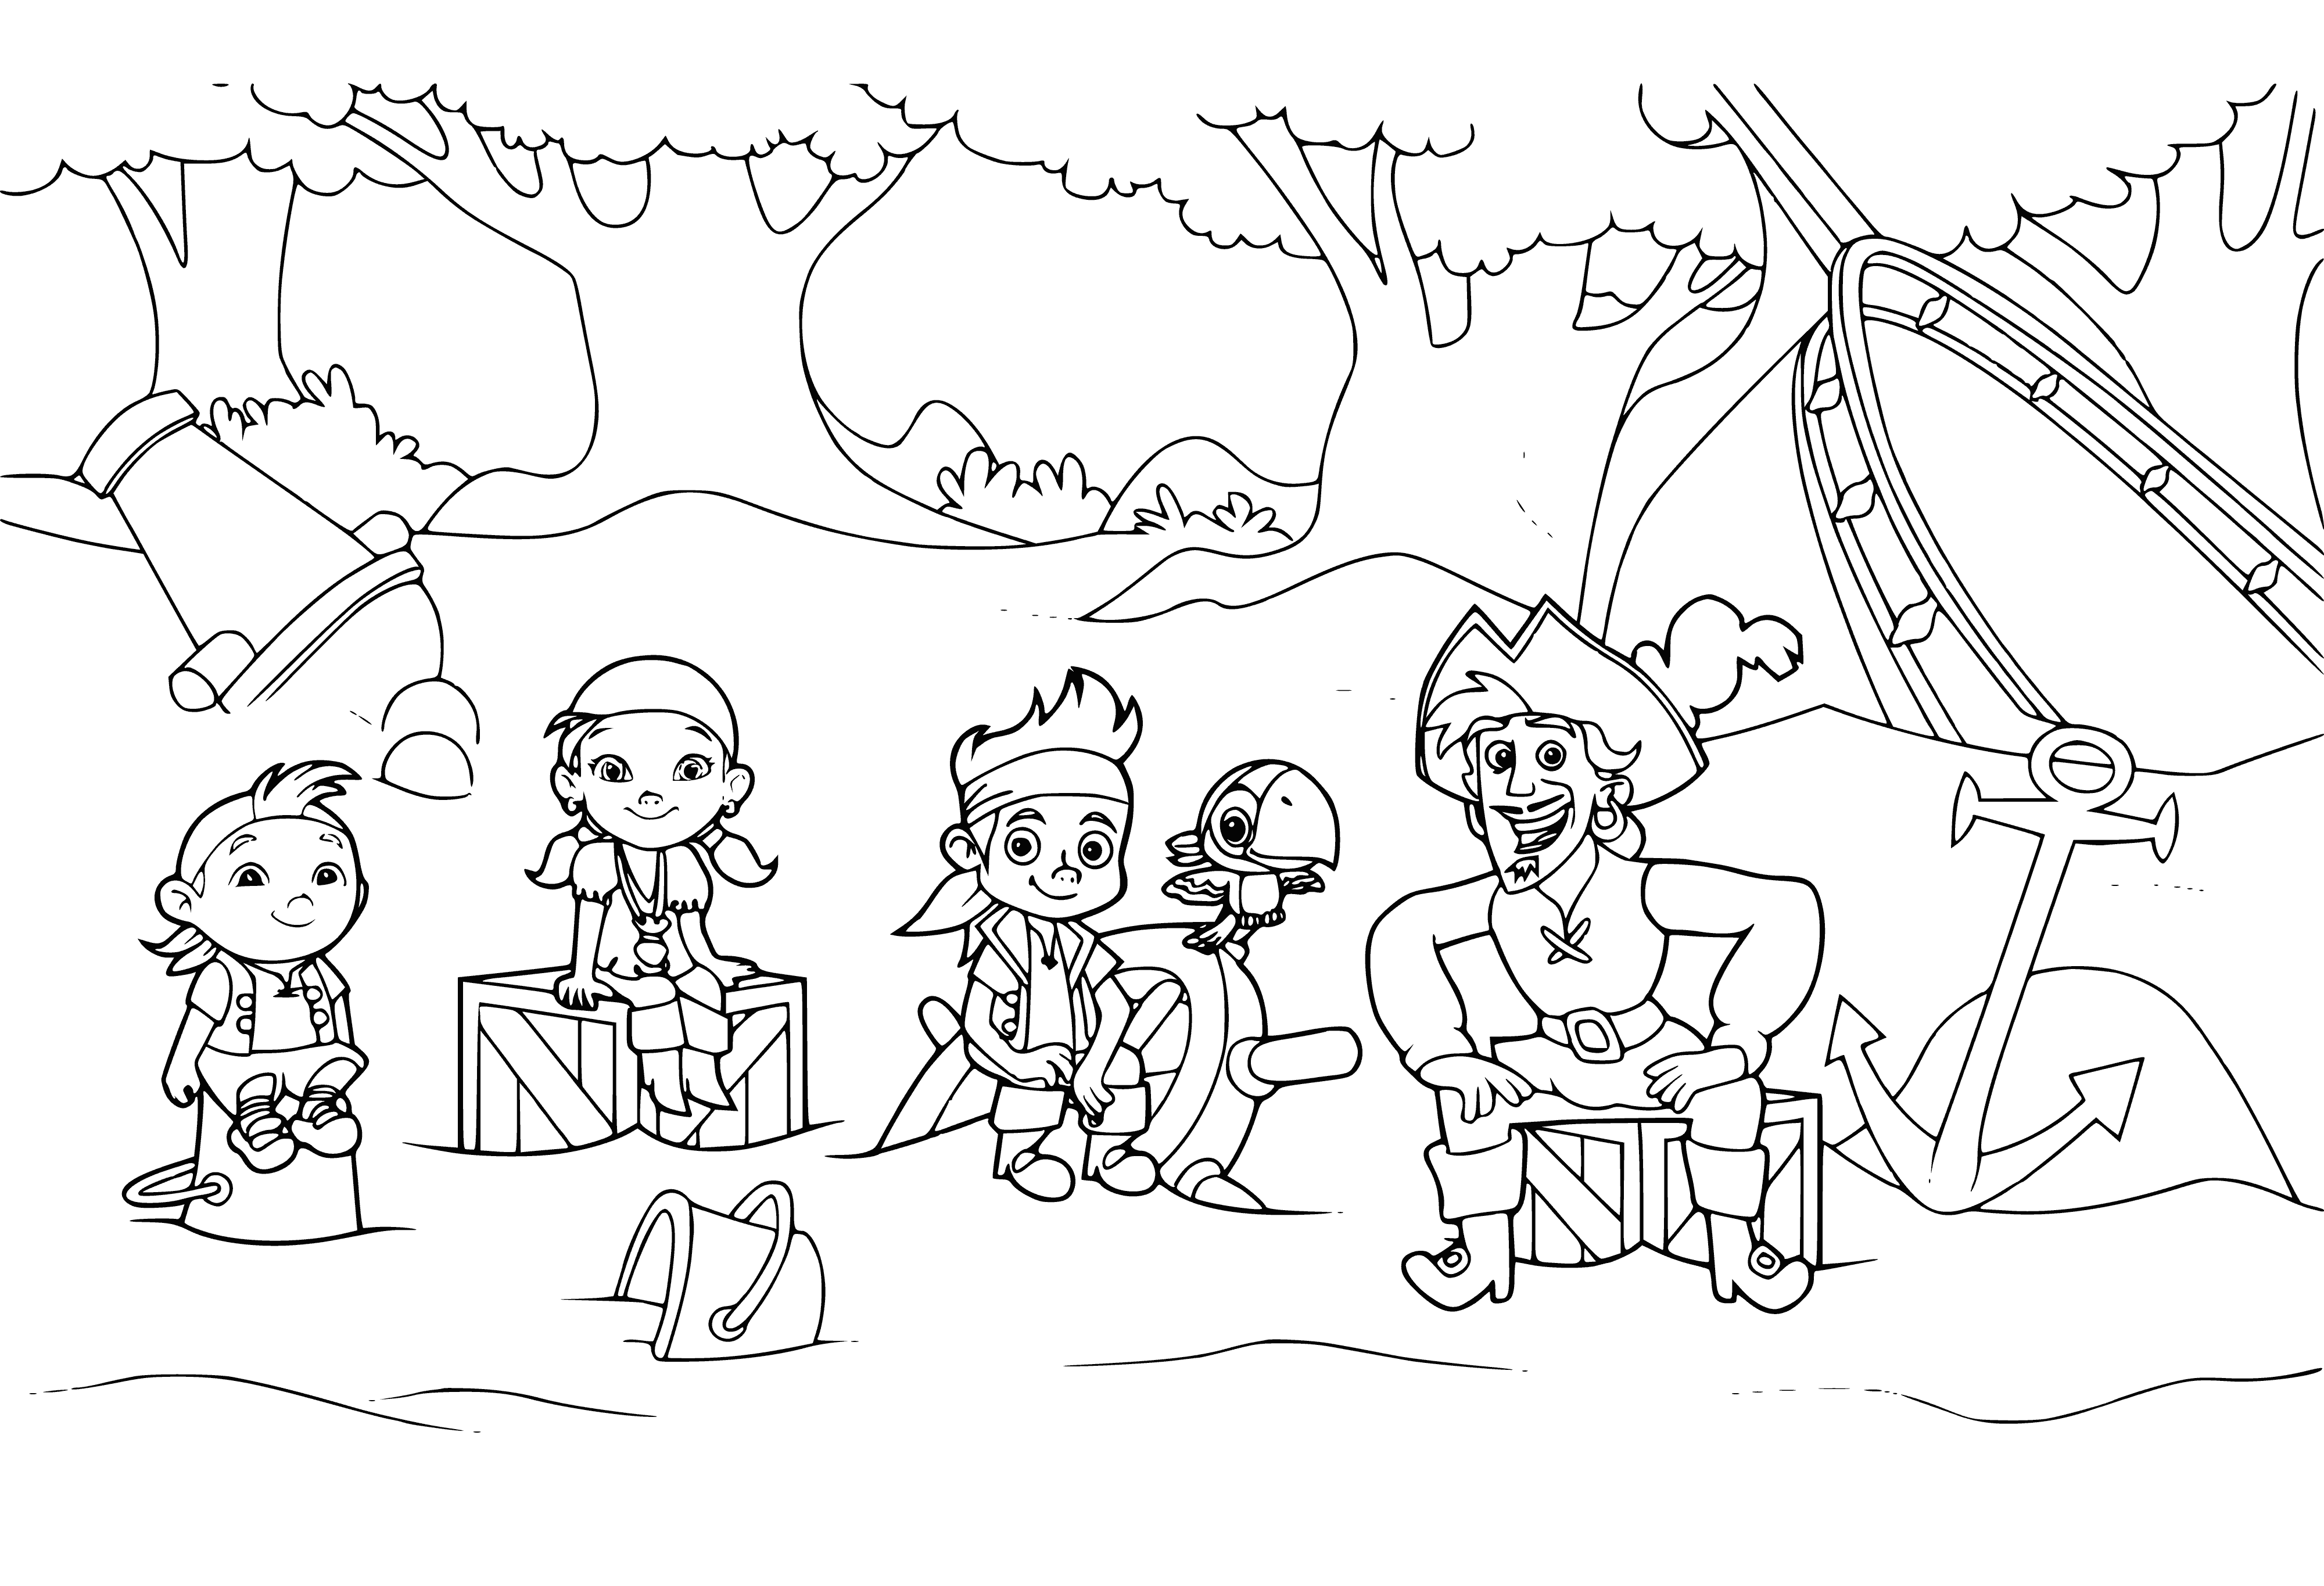 coloring page: Pirate with blue bandana, gold earring & sword holds telescope amidst pirate ship & island in the distance.